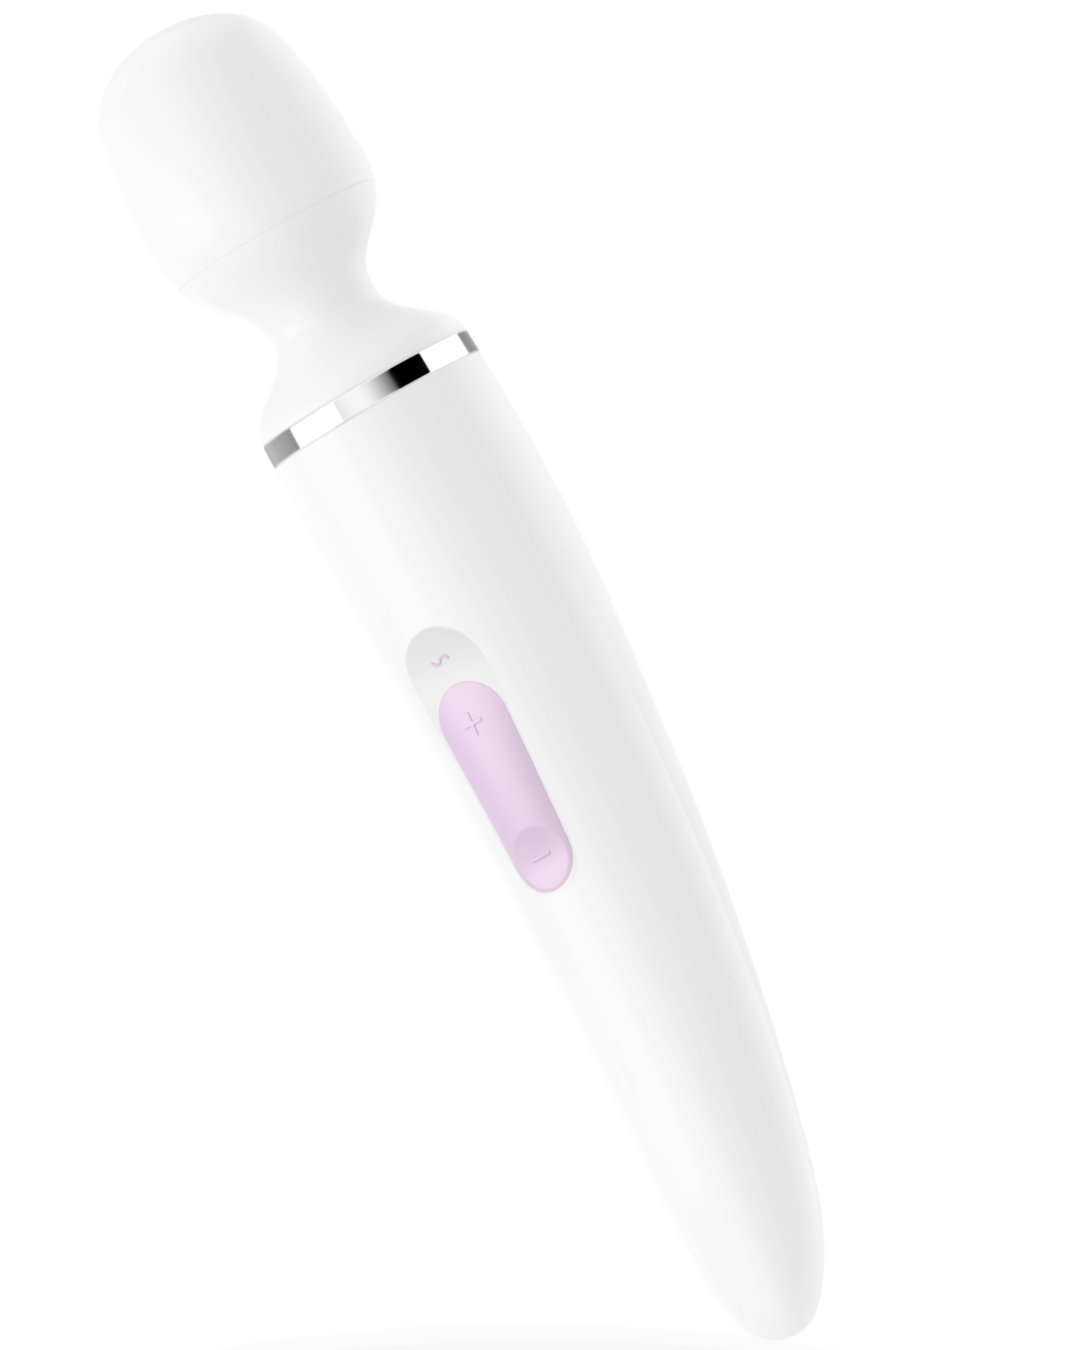 Satisfyer Wand-er Woman XXL Wand - White Side View